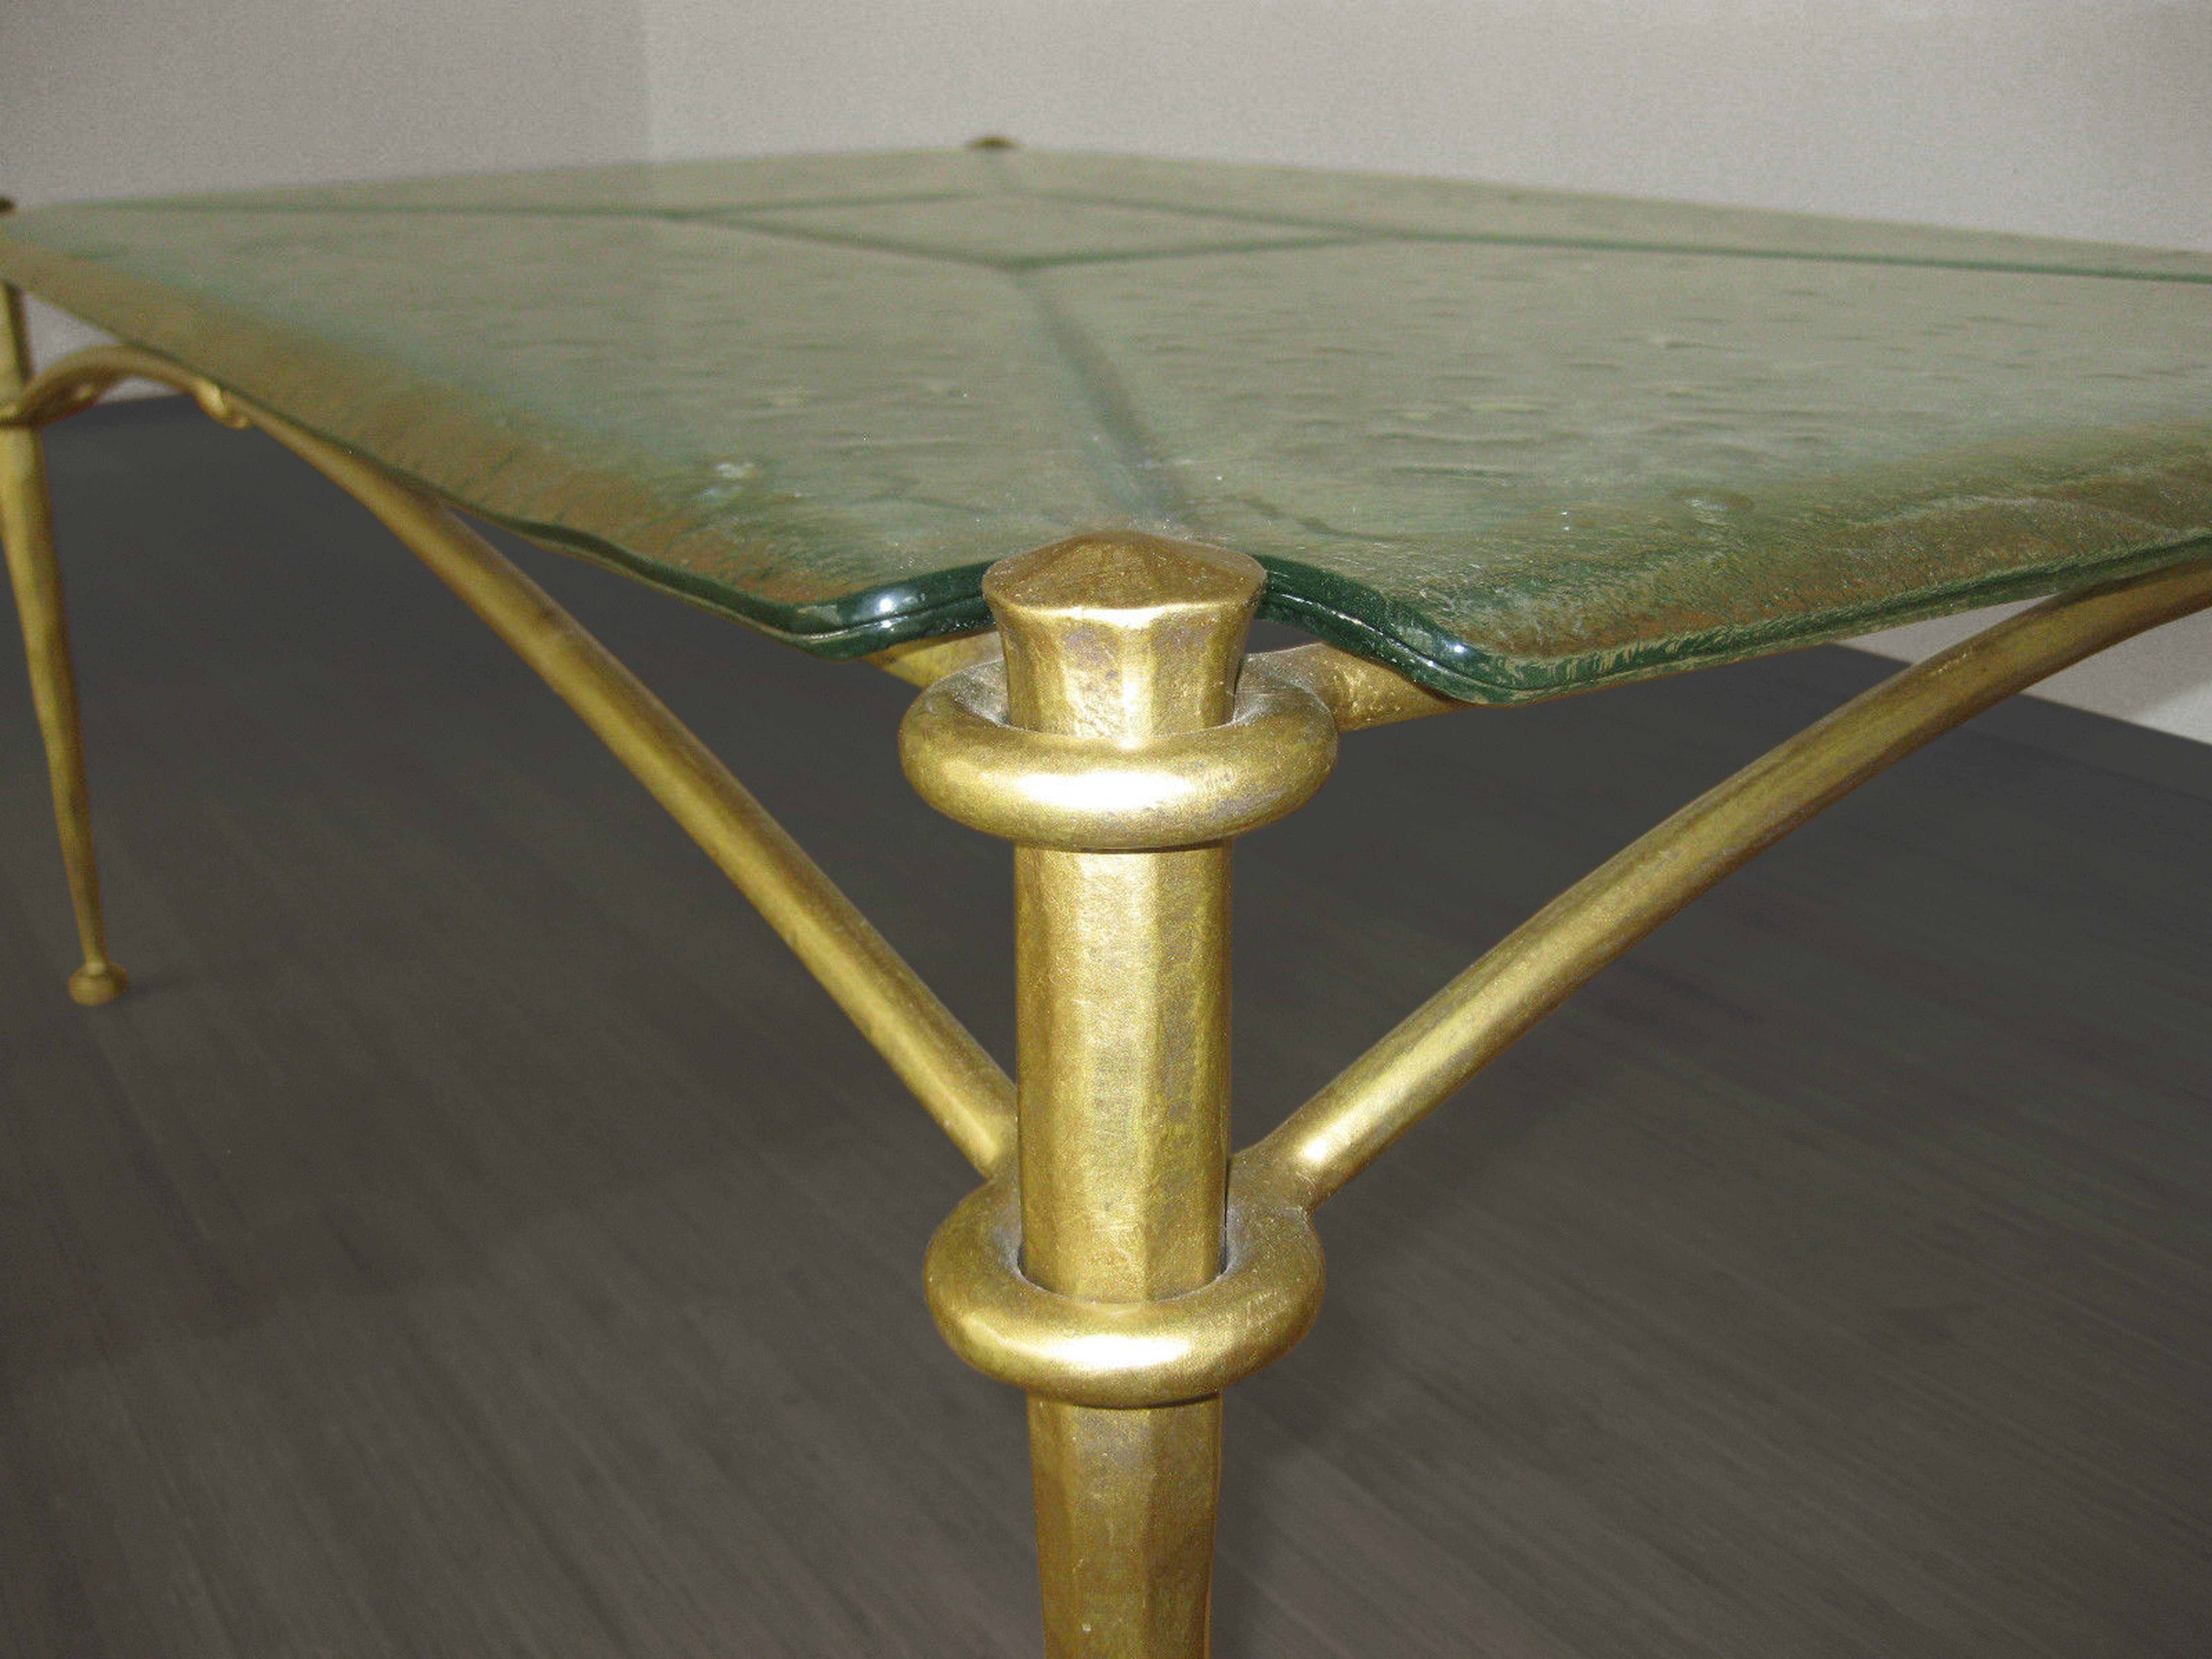 A foraged bronze coffee table with textured glass top.

Italian, Circa 1940's